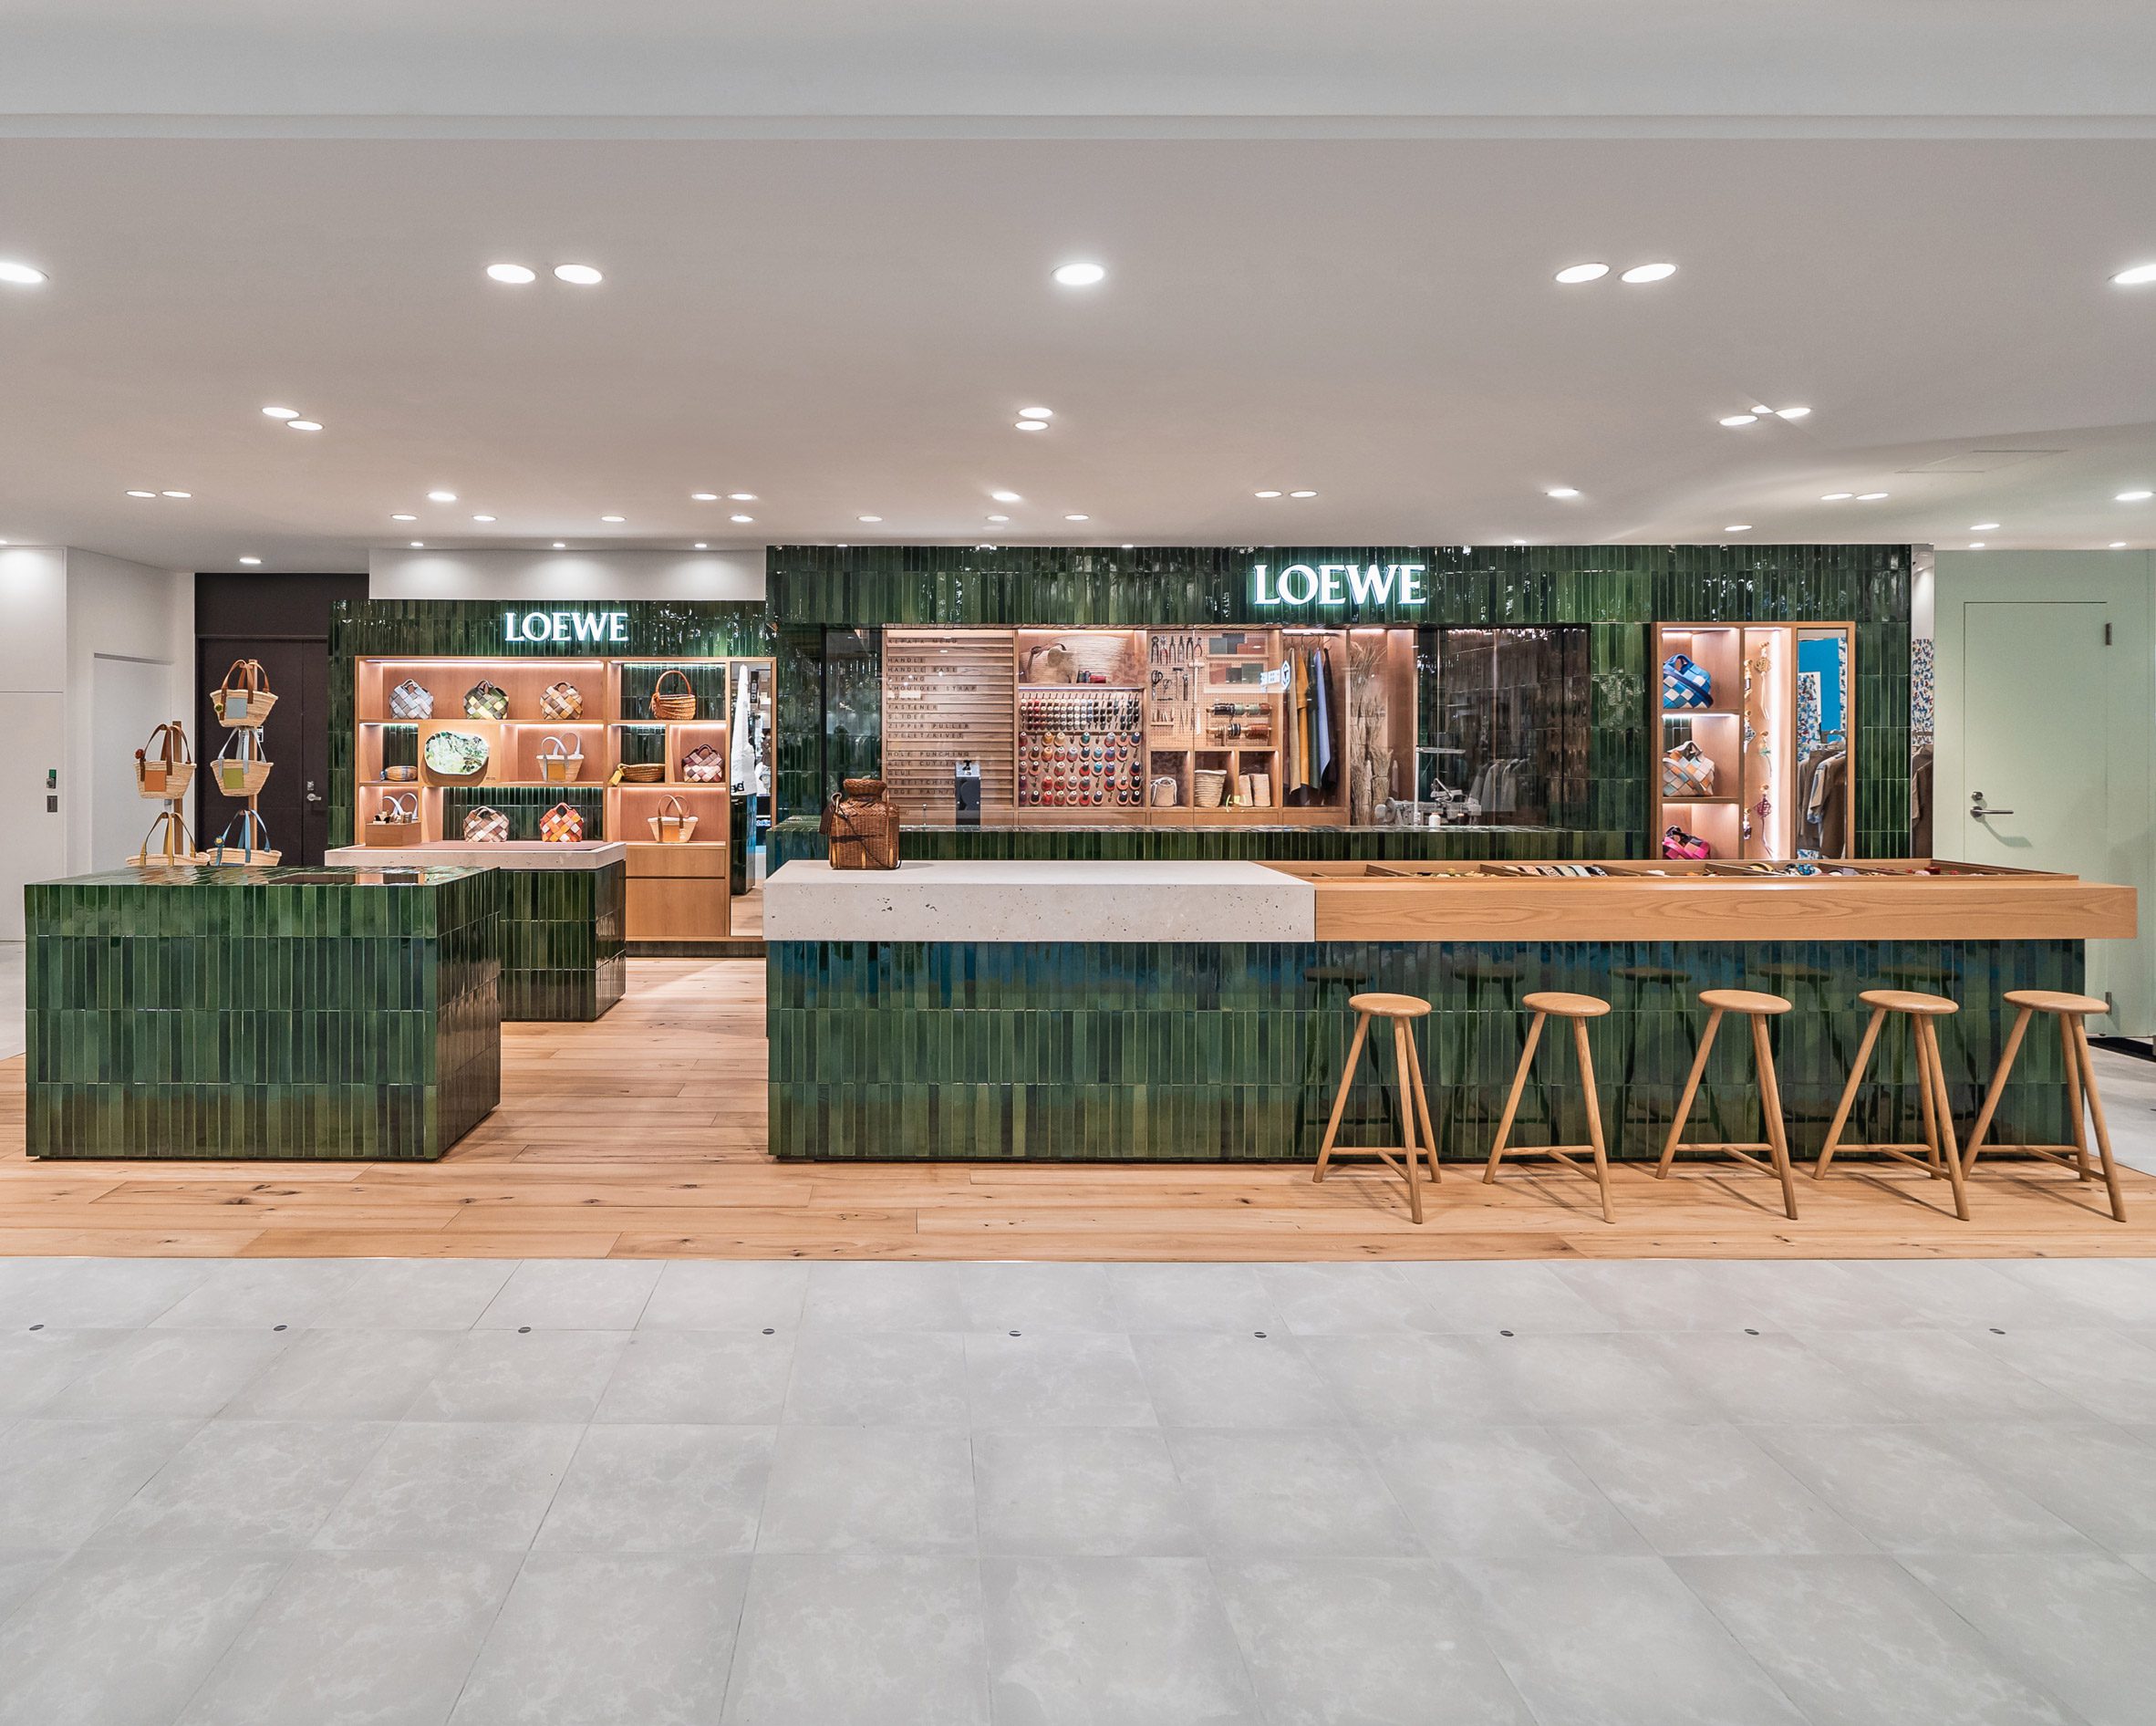 Loewe ReCraft store in Osaka preserves and repairs the brand's leather goods